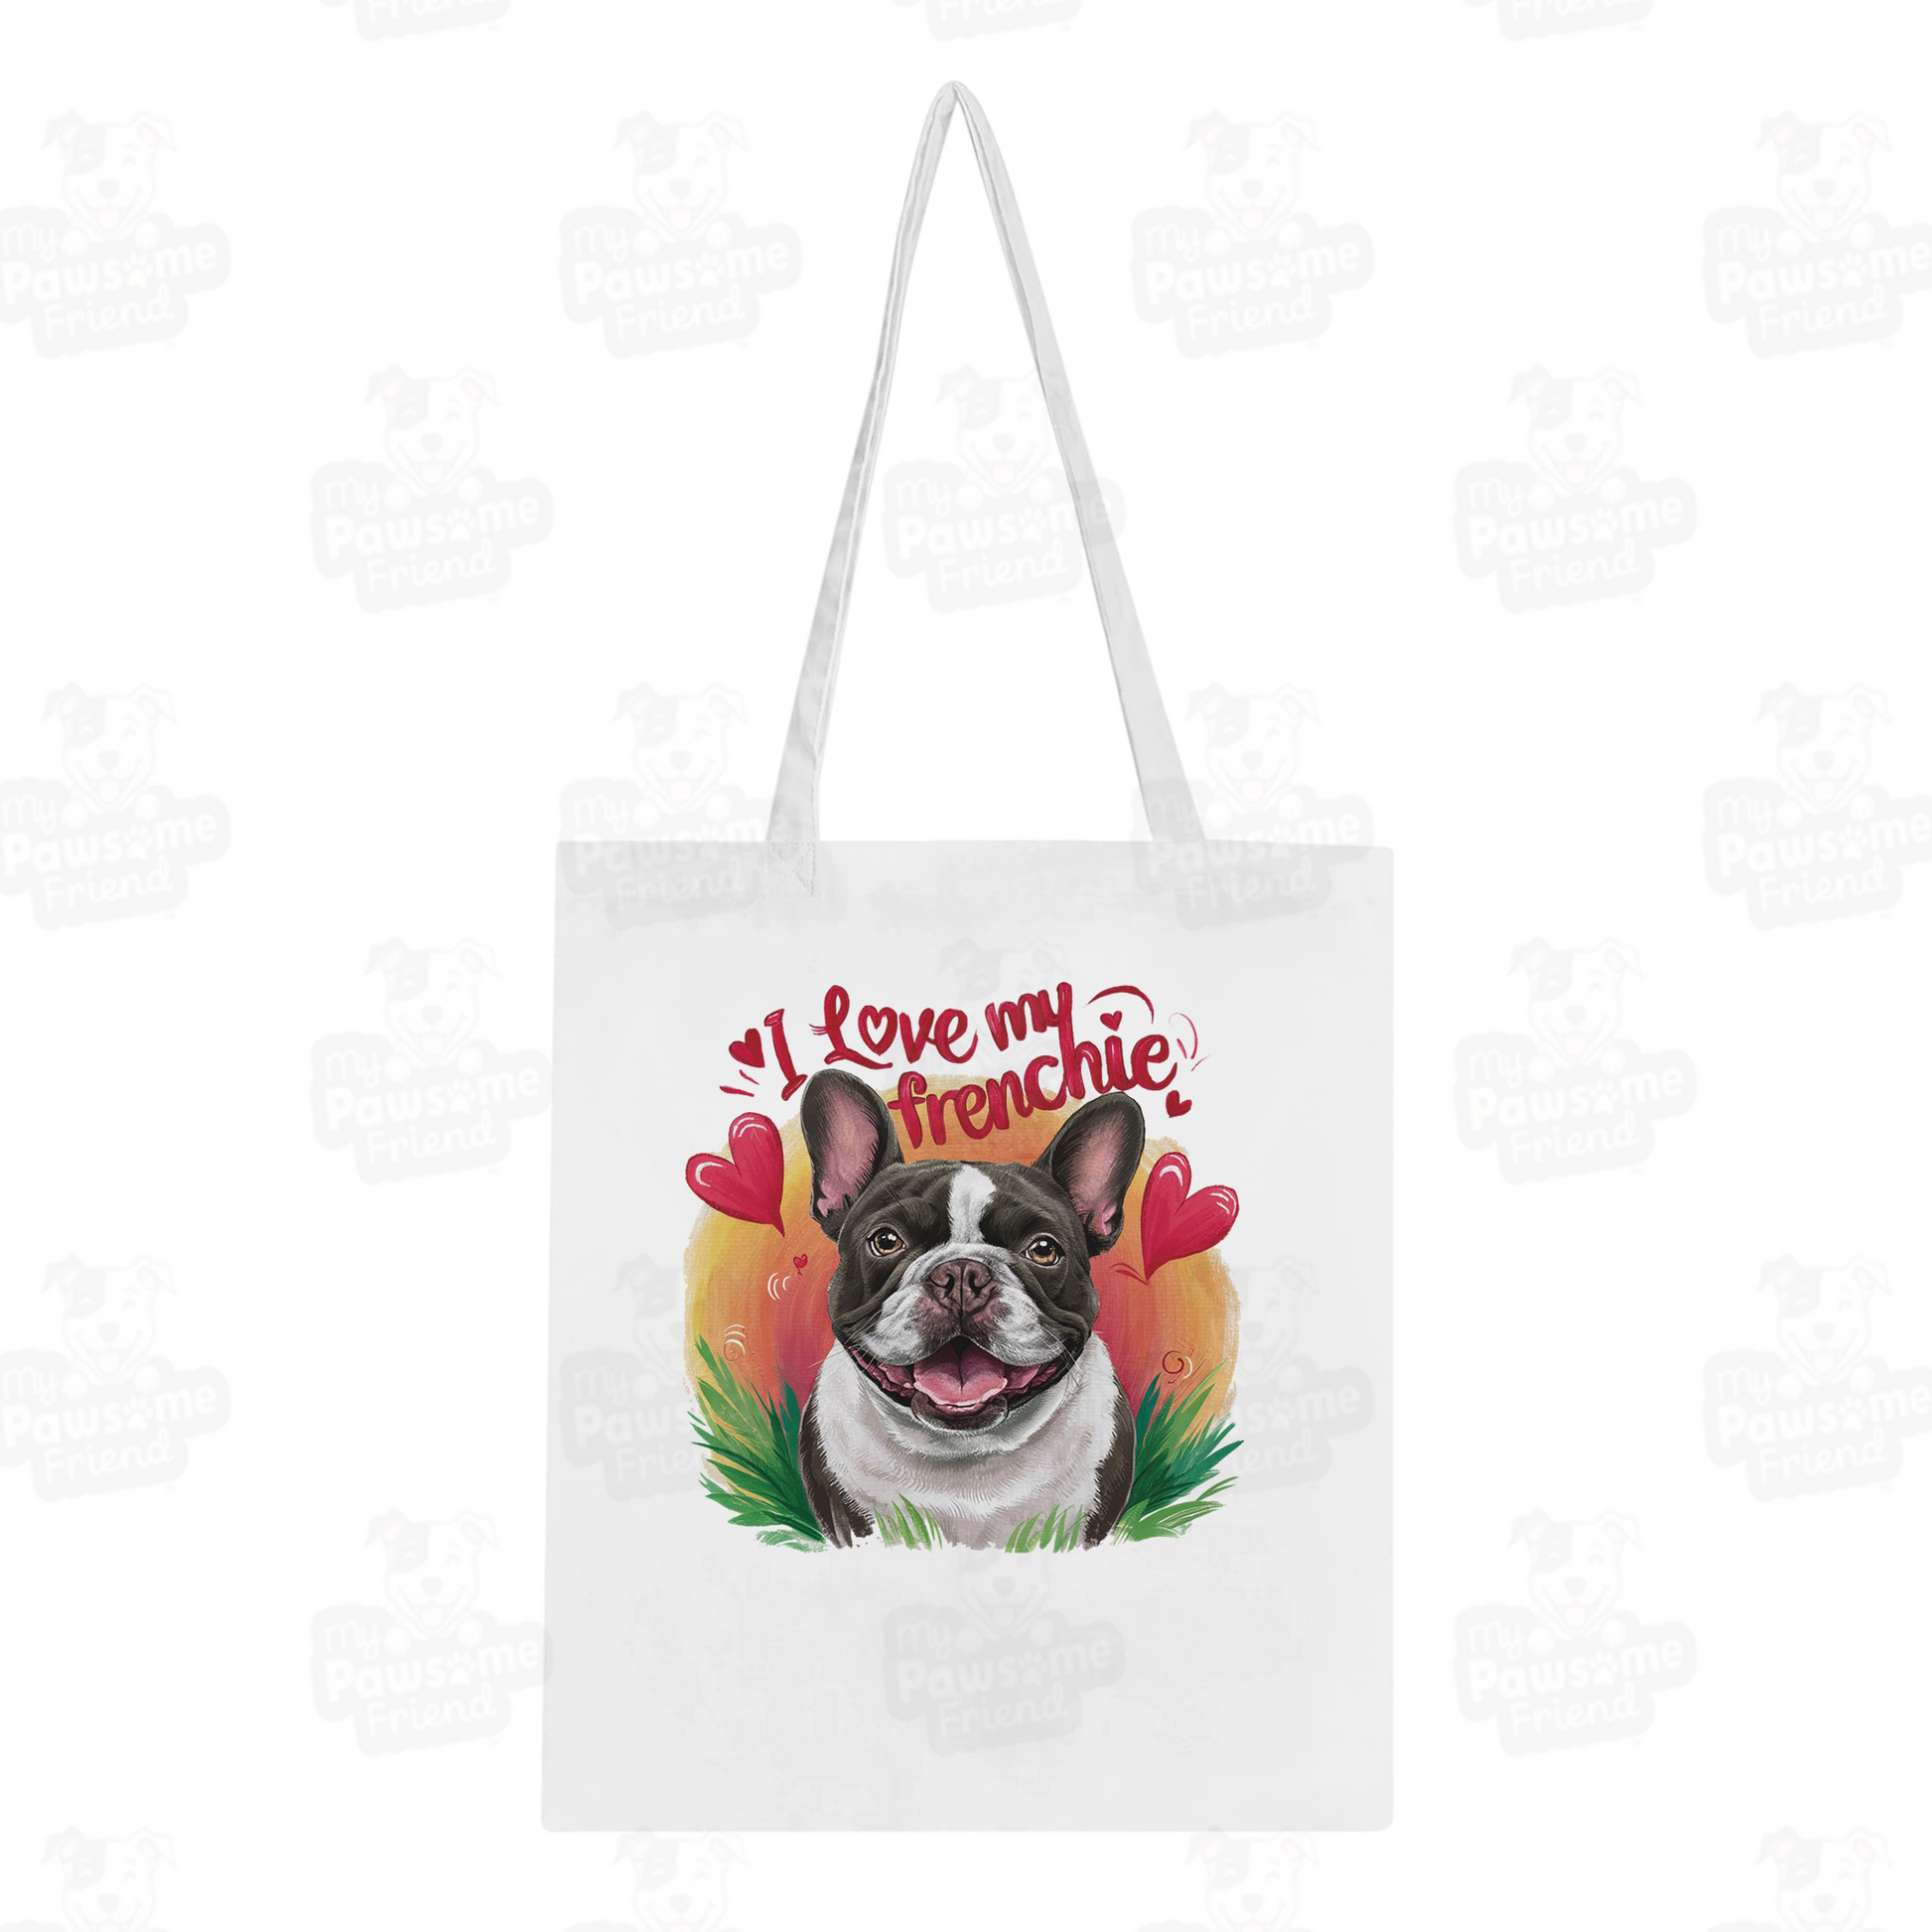 A Tote bag with a cute design featuring a french bulldog smiling surrounded by heart designs, and the phrase "I love my Frenchie". The color of the tote bag is white